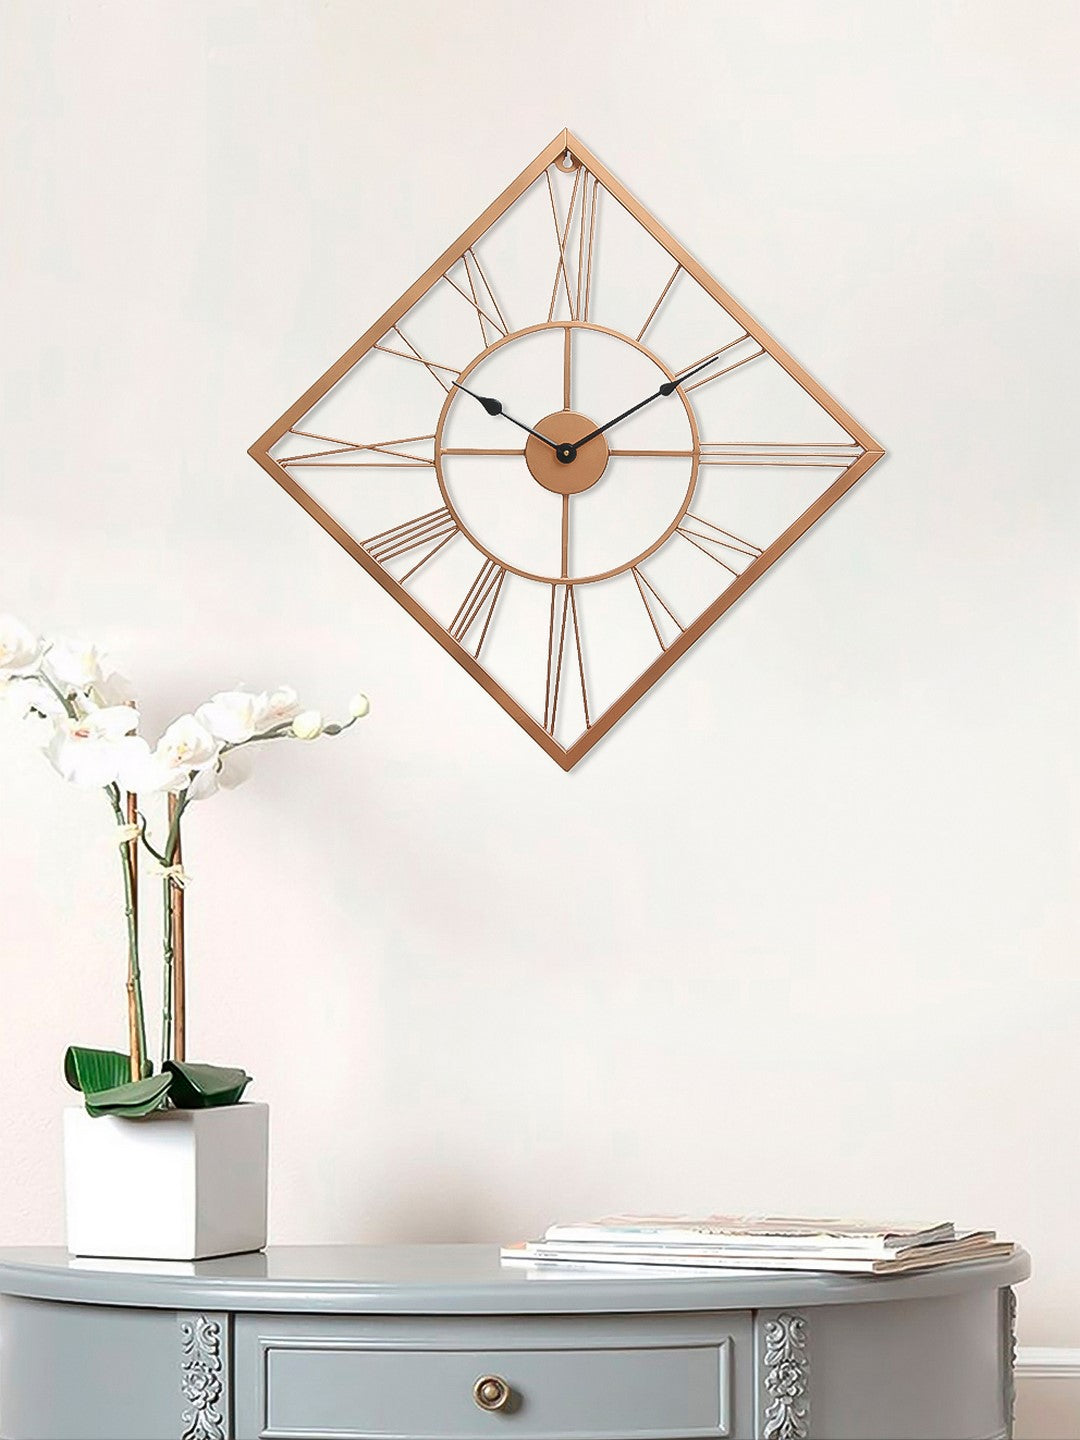 Copper Color Iron Kite Shape Analog Designer Wall Clock Without Glass 2